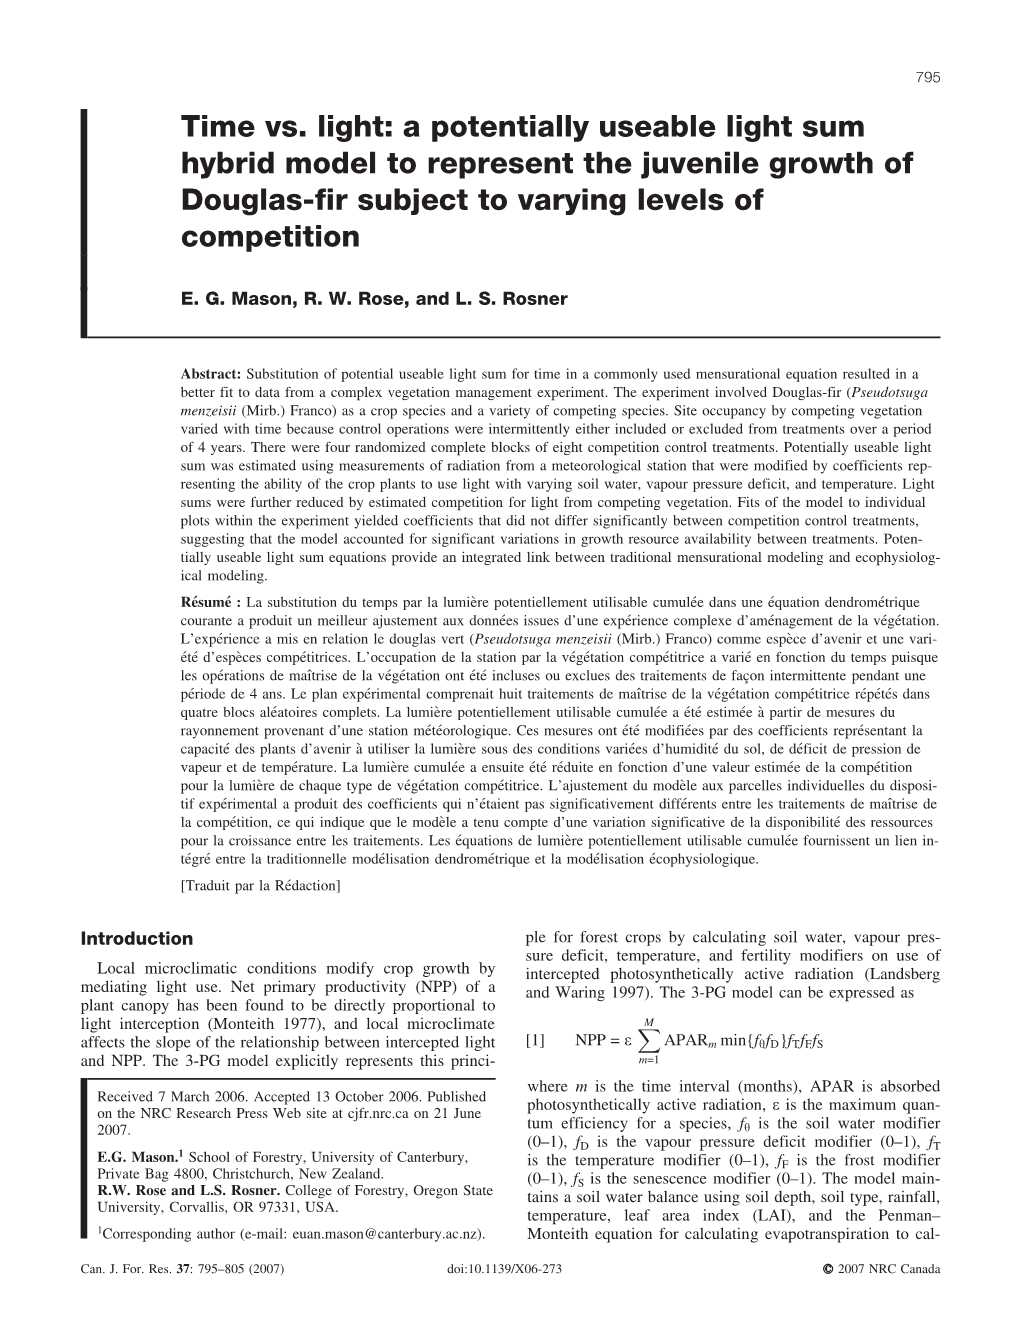 Time Vs. Light: a Potentially Useable Light Sum Hybrid Model to Represent the Juvenile Growth of Douglas-Fir Subject to Varying Levels of Competition